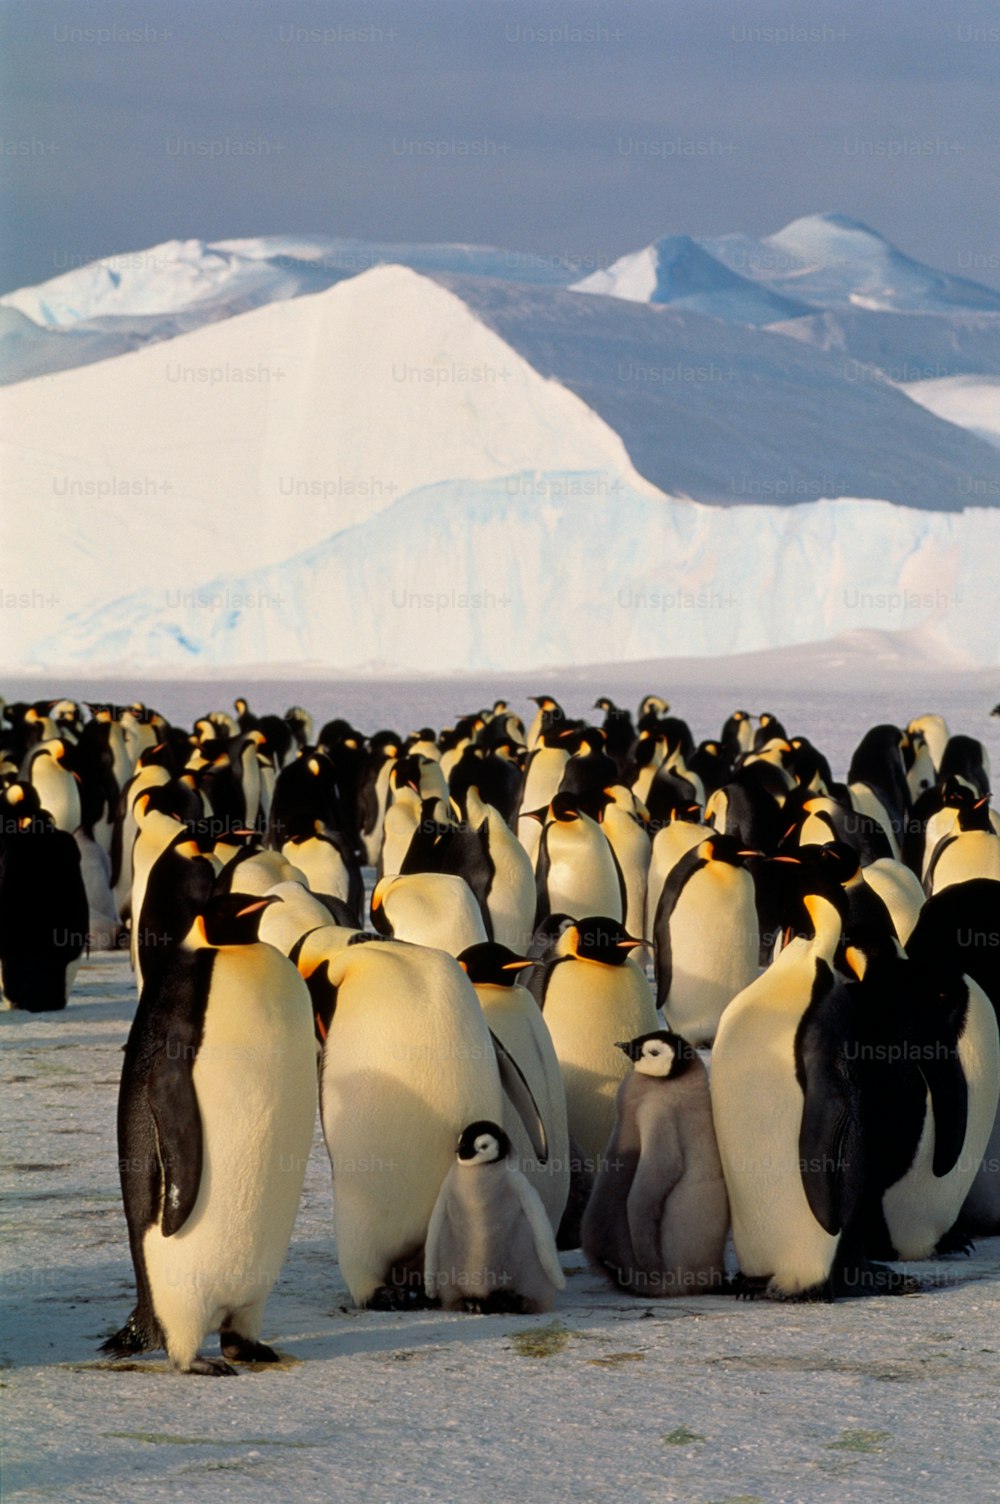 Emperor penguins are the largest species of penguin. As with all penguins they cannot fly but are strong swimmers. Emperor penguins live on the ice of Antarctica.